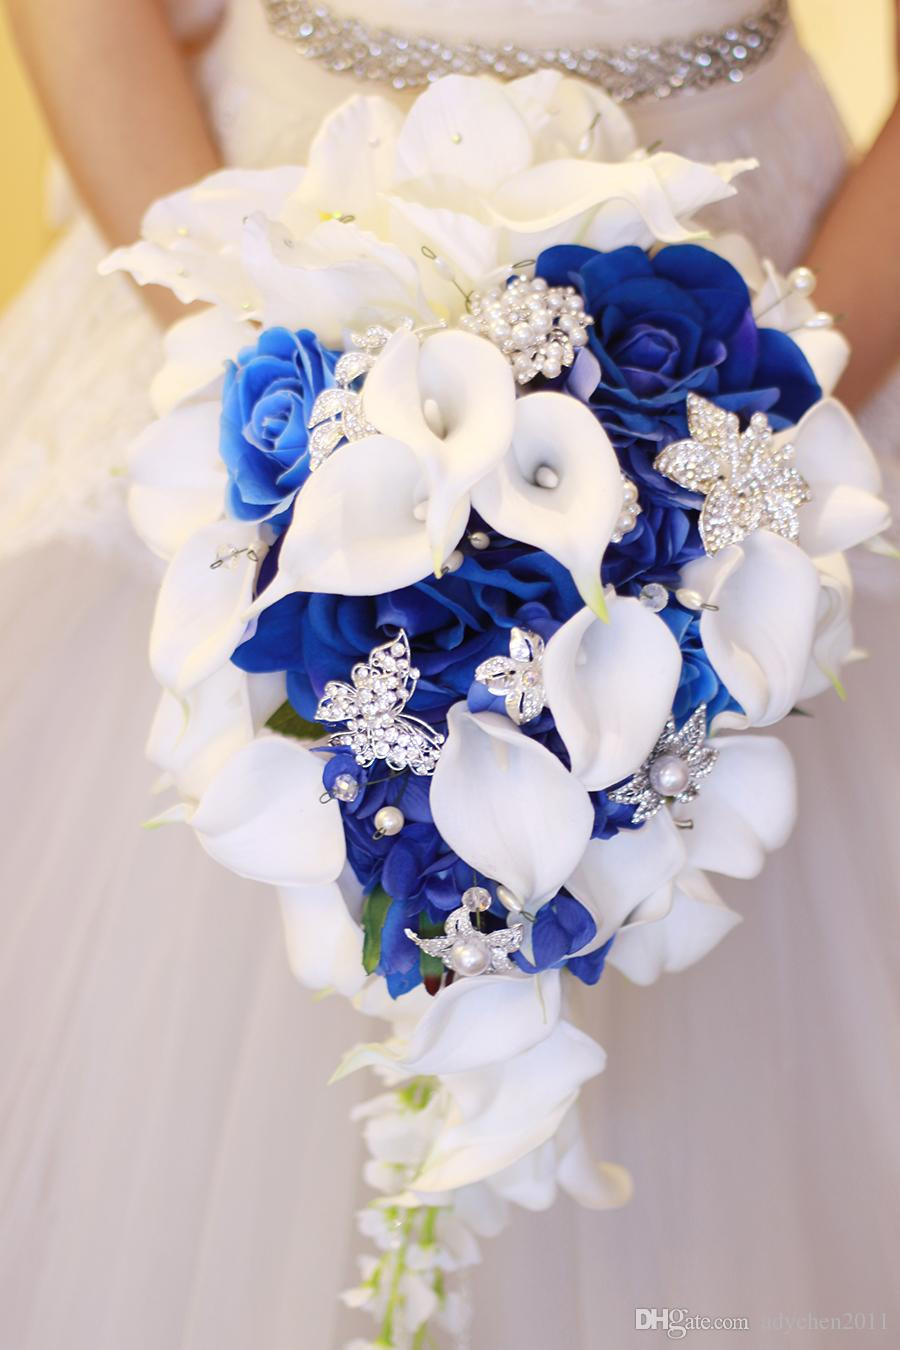 Royal Blue Flowers For Wedding
 Wedding Bouquets Royal Blue Flowers Waterfall Real Touch